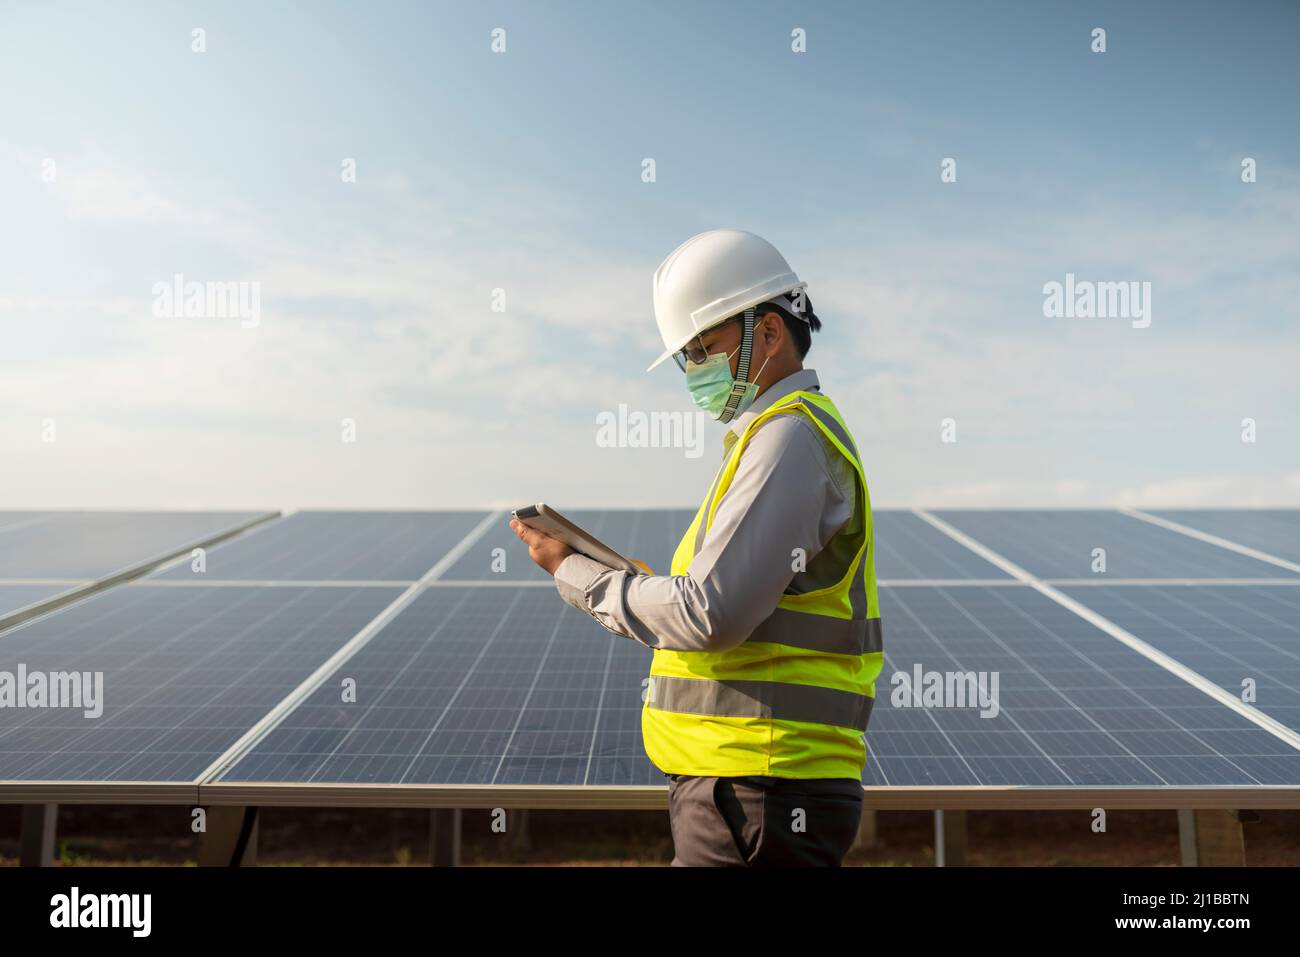 Engineers working to power solar panel renewable power plants in Thailand. Stock Photo